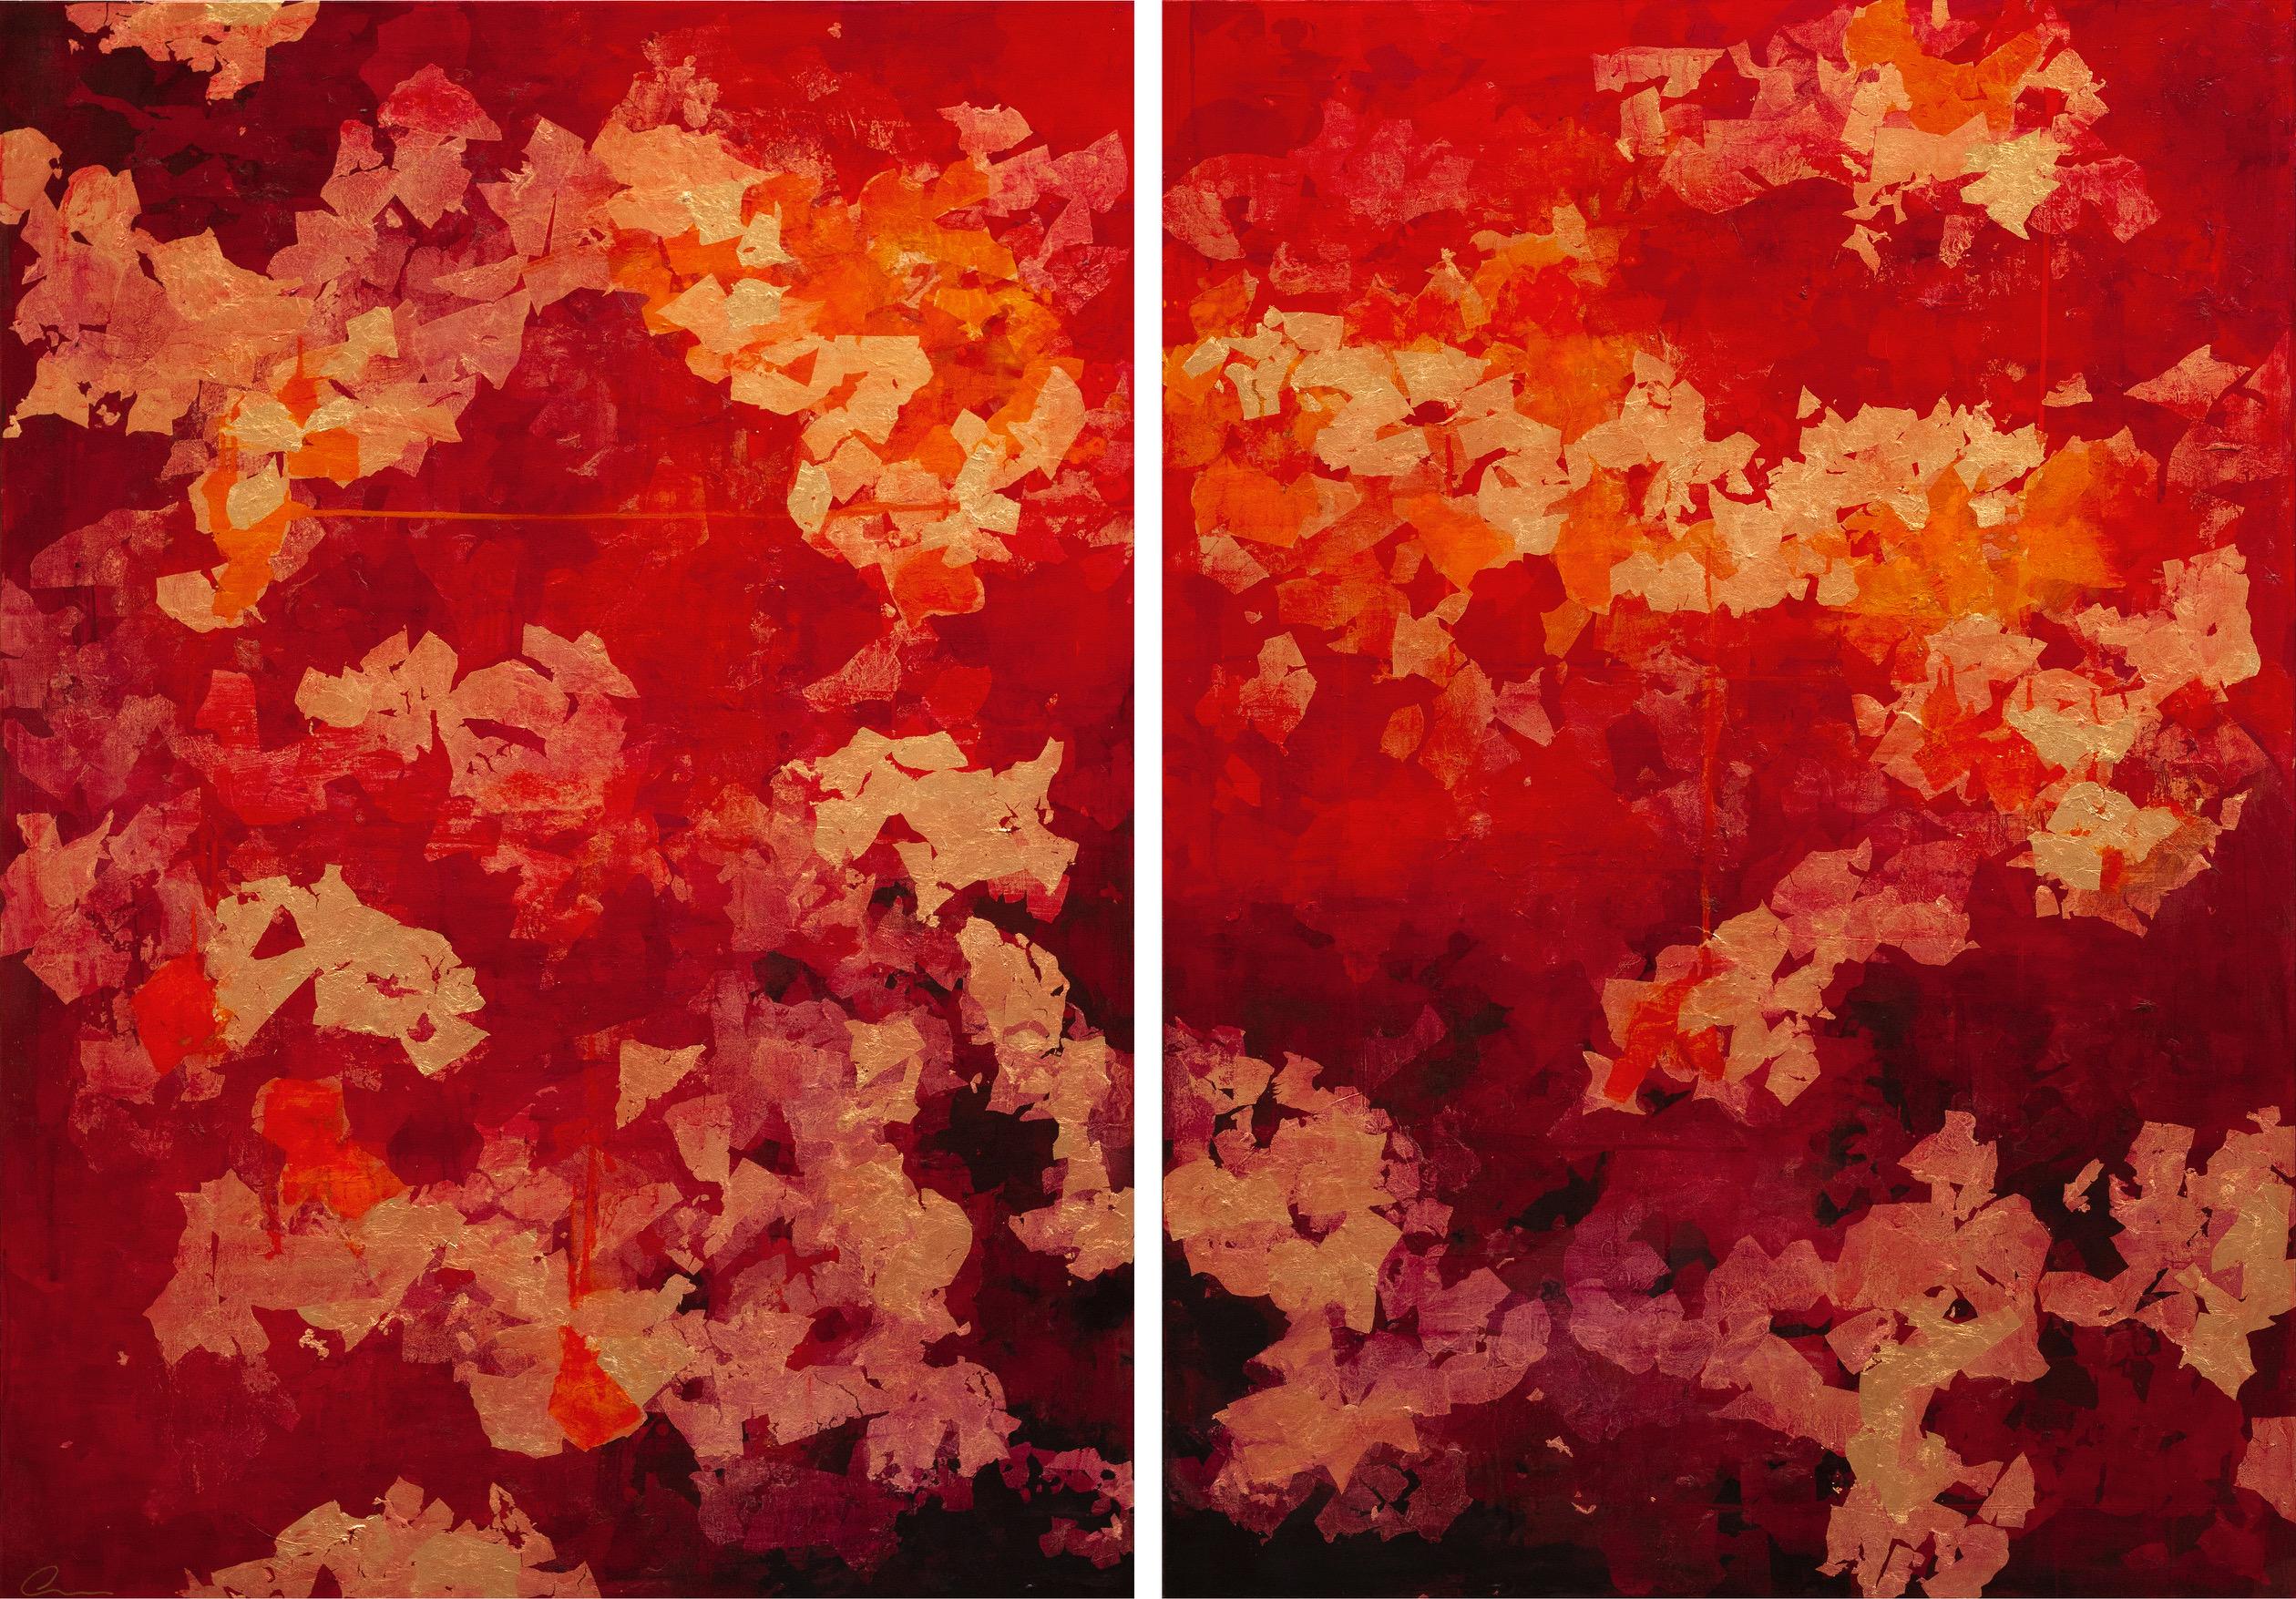 Exhale-Inhale Diptych - 21st Century, Contemporary, Abstract Painting, Gold Leaf